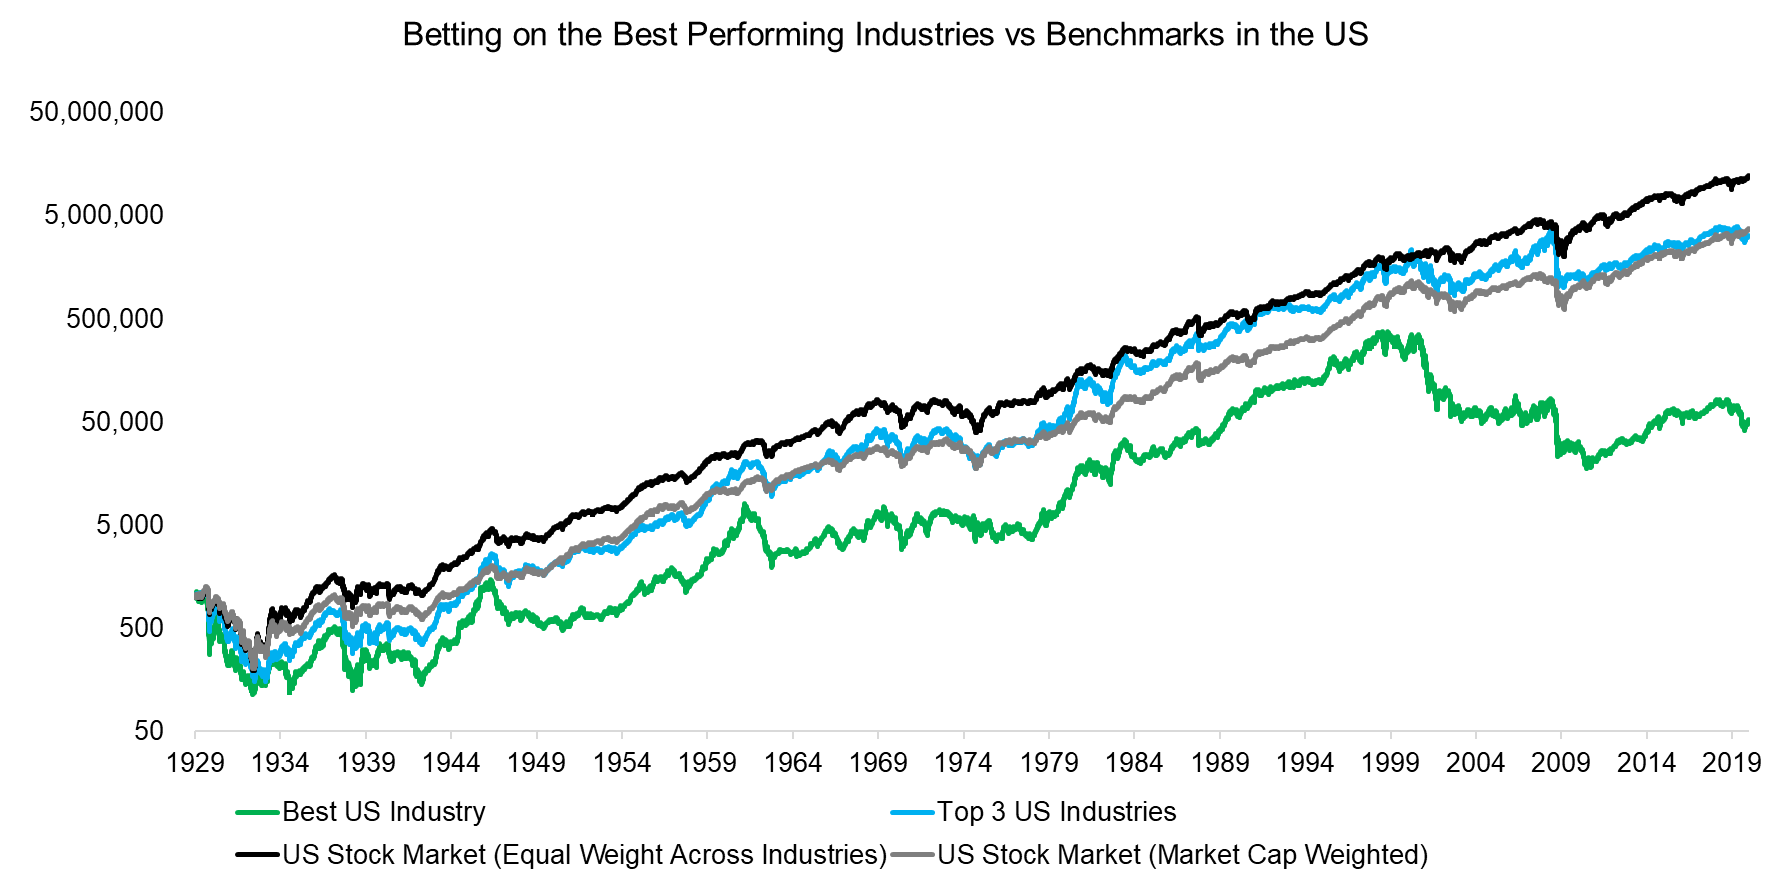 Betting on the Best Performing Industries vs Benchmarks in the US